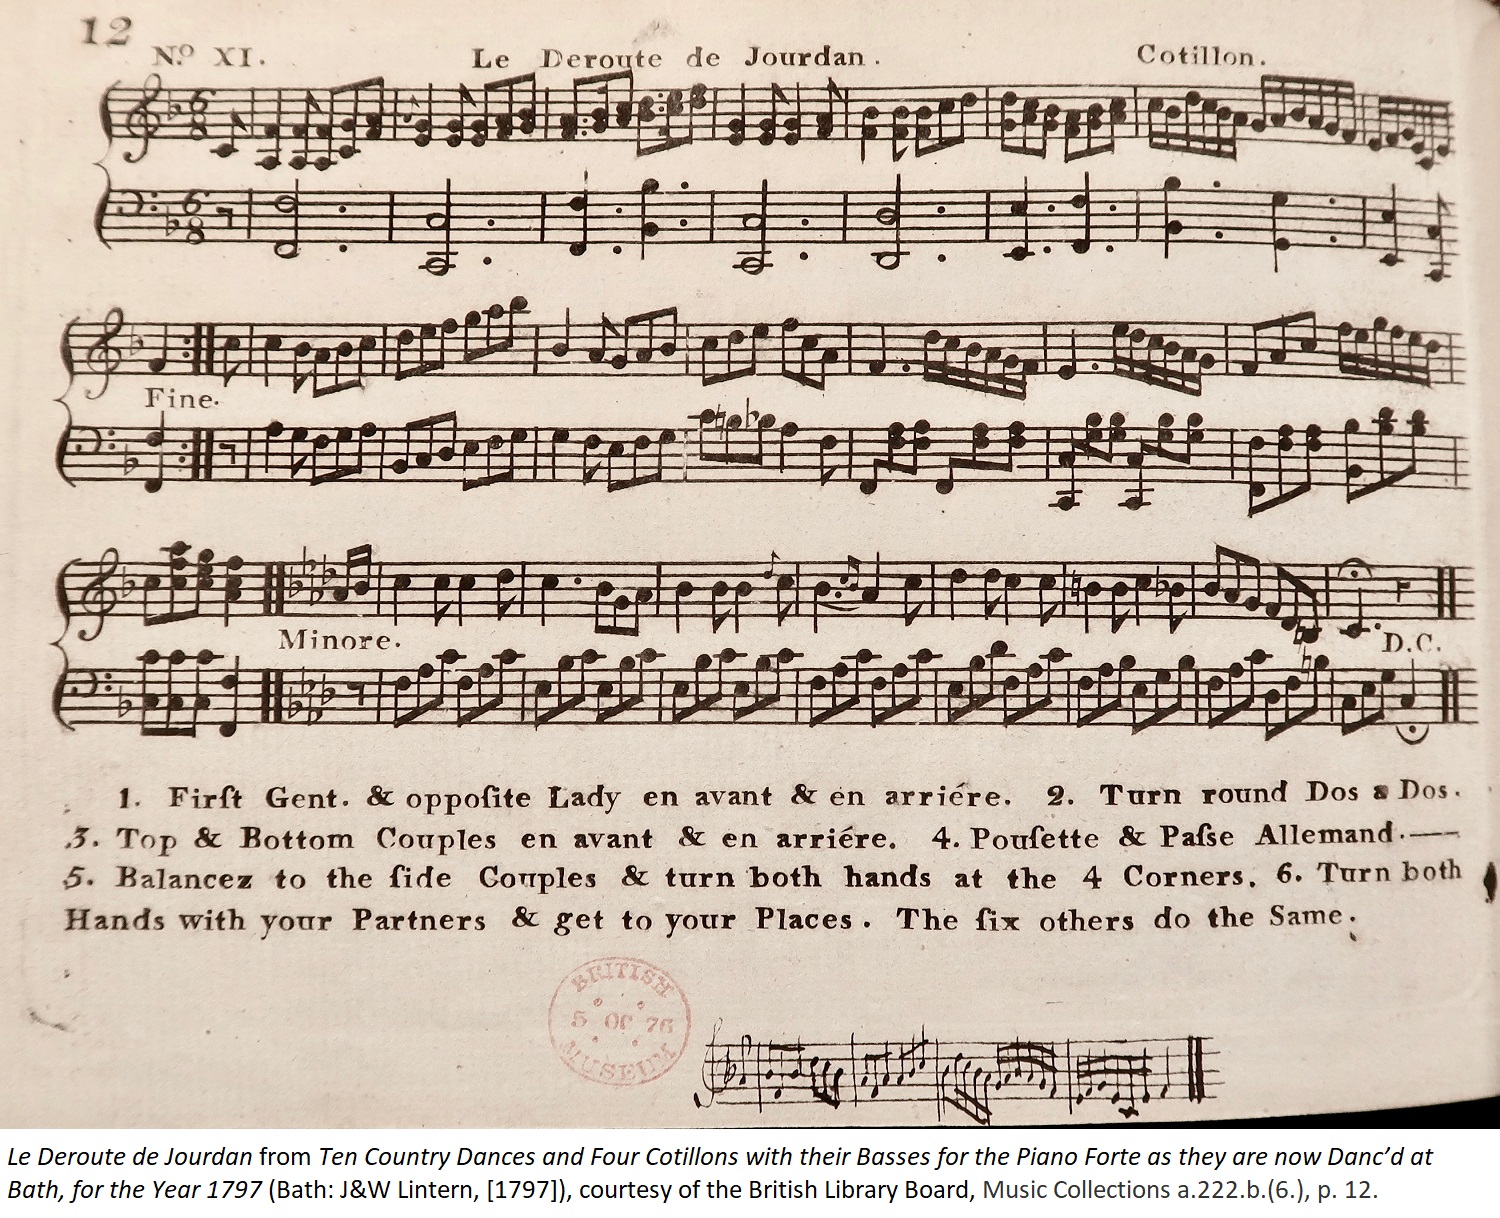 Le Deroute de Jourdan from Ten Country Dances and Four Cotillons with their Basses for the Piano Forte as they are now Danc’d at Bath, for the Year 1797 (Bath: J&W Lintern, [1797]), courtesy of the British Library Board, Music Collections a.222.b.(6.), p. 12.